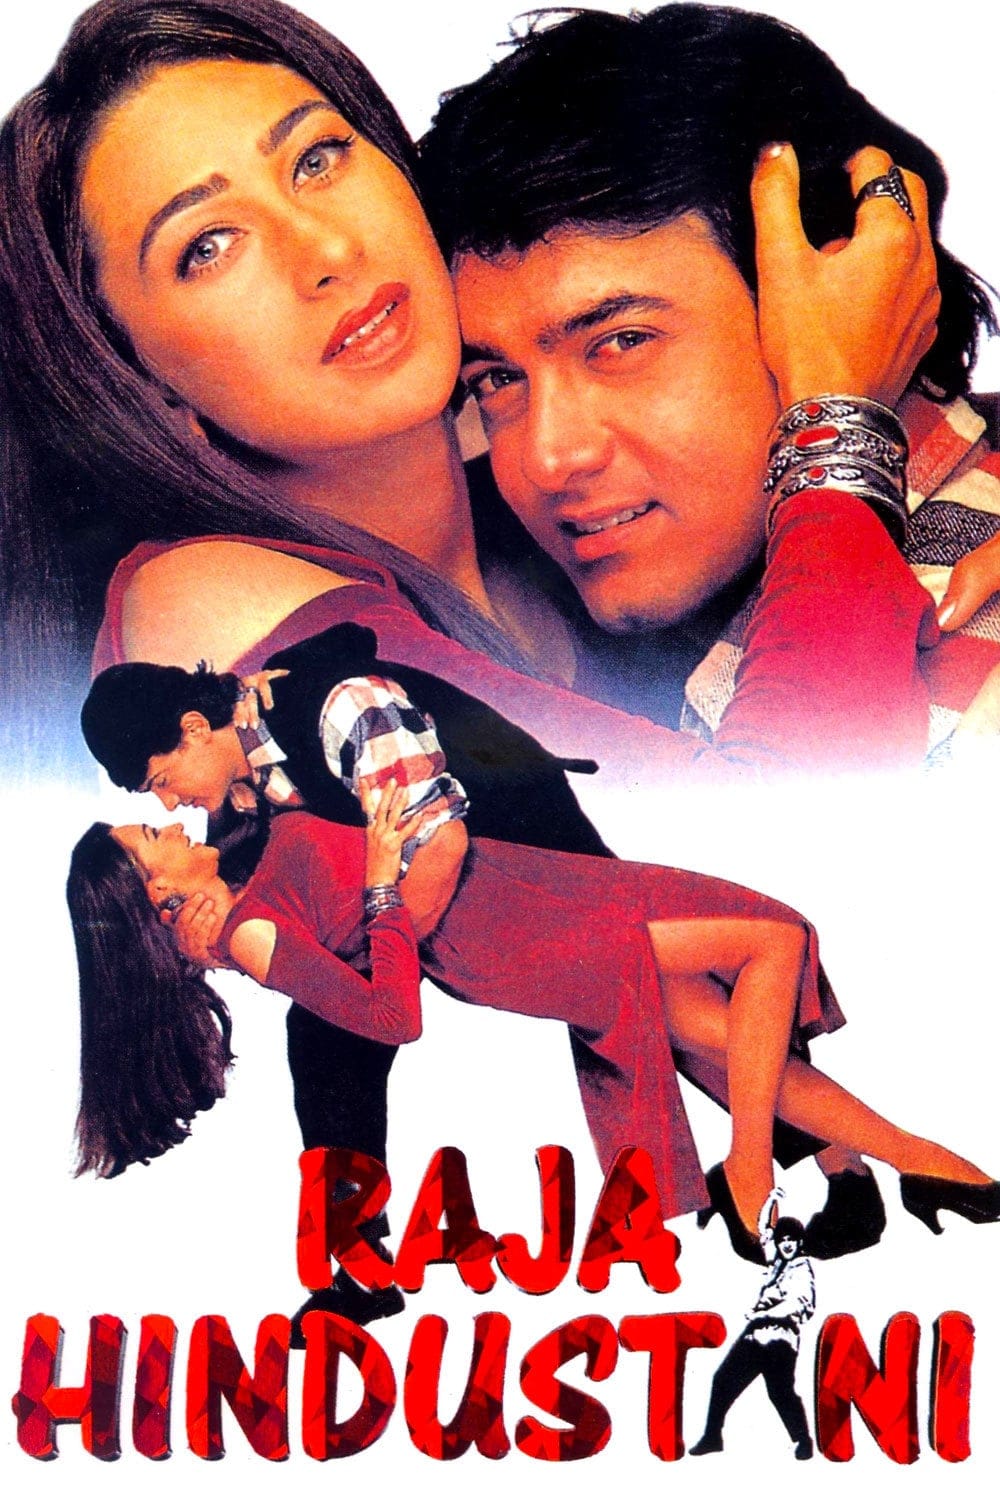 Poster for the movie "Raja Hindustani"